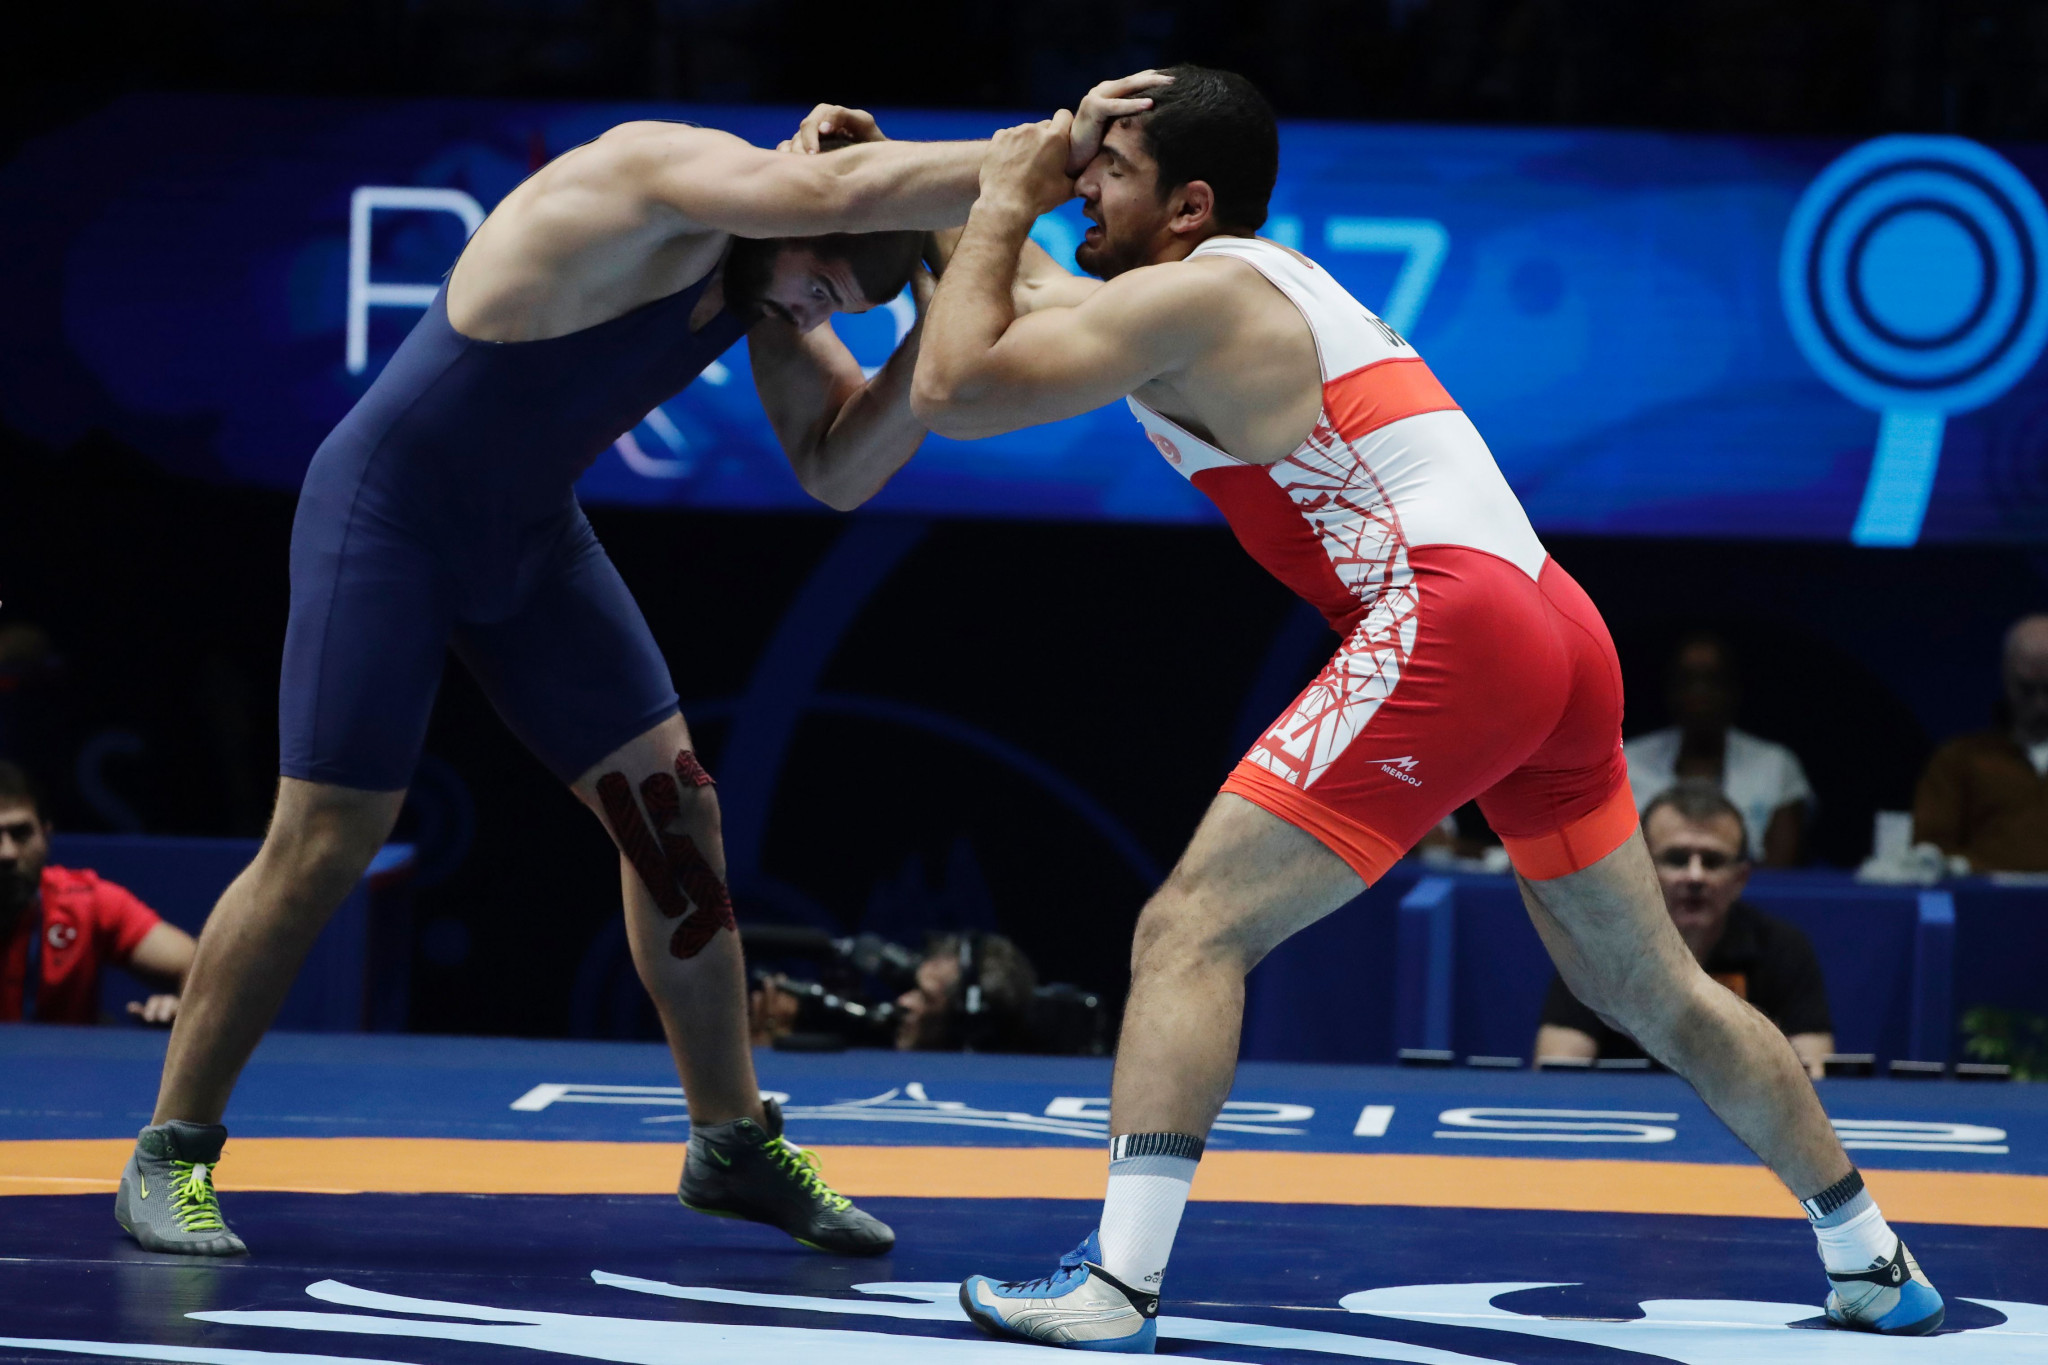 United World Wrestling released a short documentary on the rivalry between Turkey's Taha Akgül and Georgia's Geno Petriashvili ©Getty Images